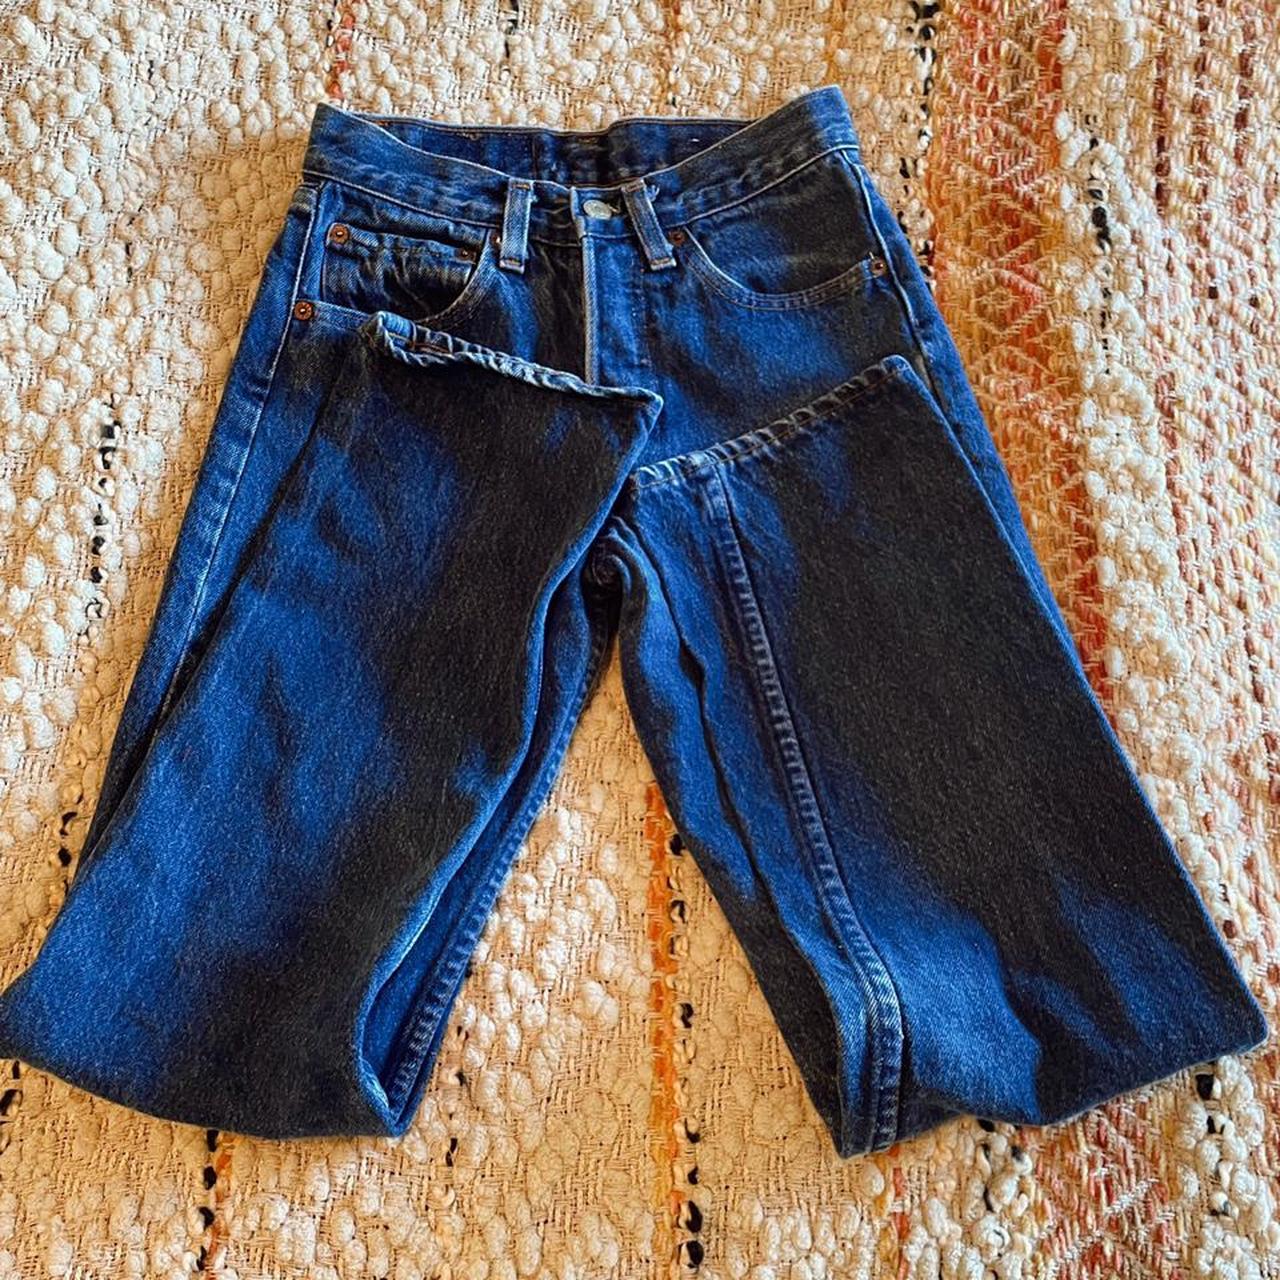 Product Image 3 - VINTAGE 1980s LEVI 501s 👖

HIGH